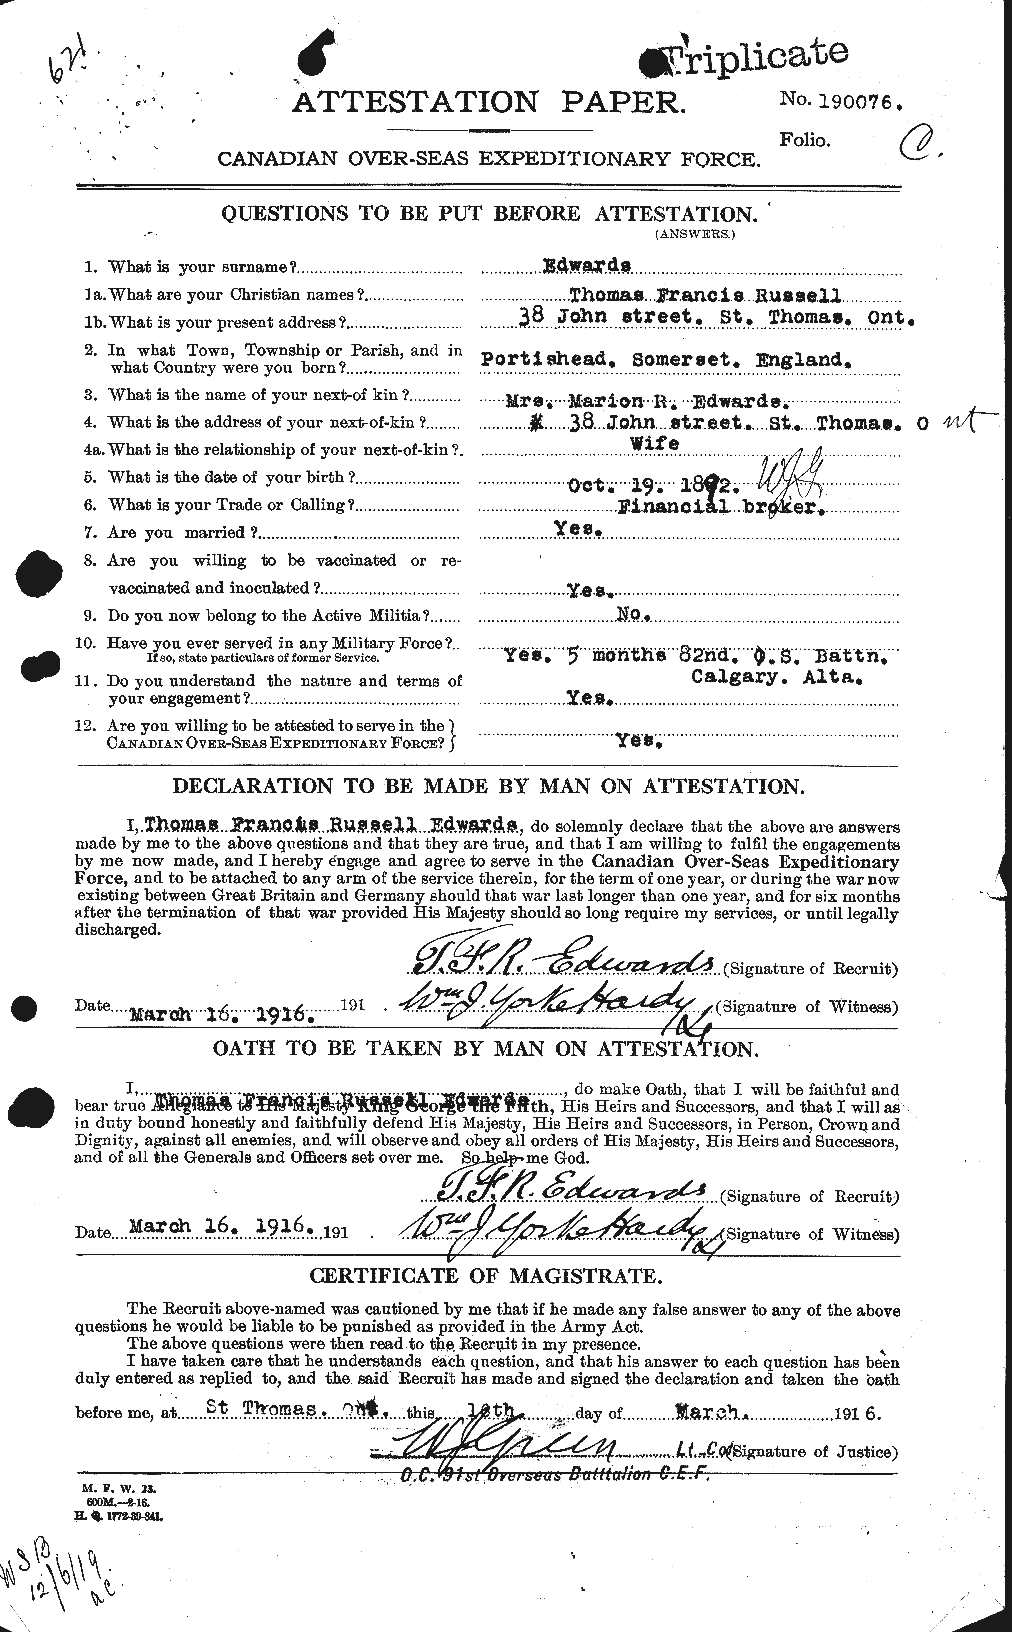 Personnel Records of the First World War - CEF 310345a